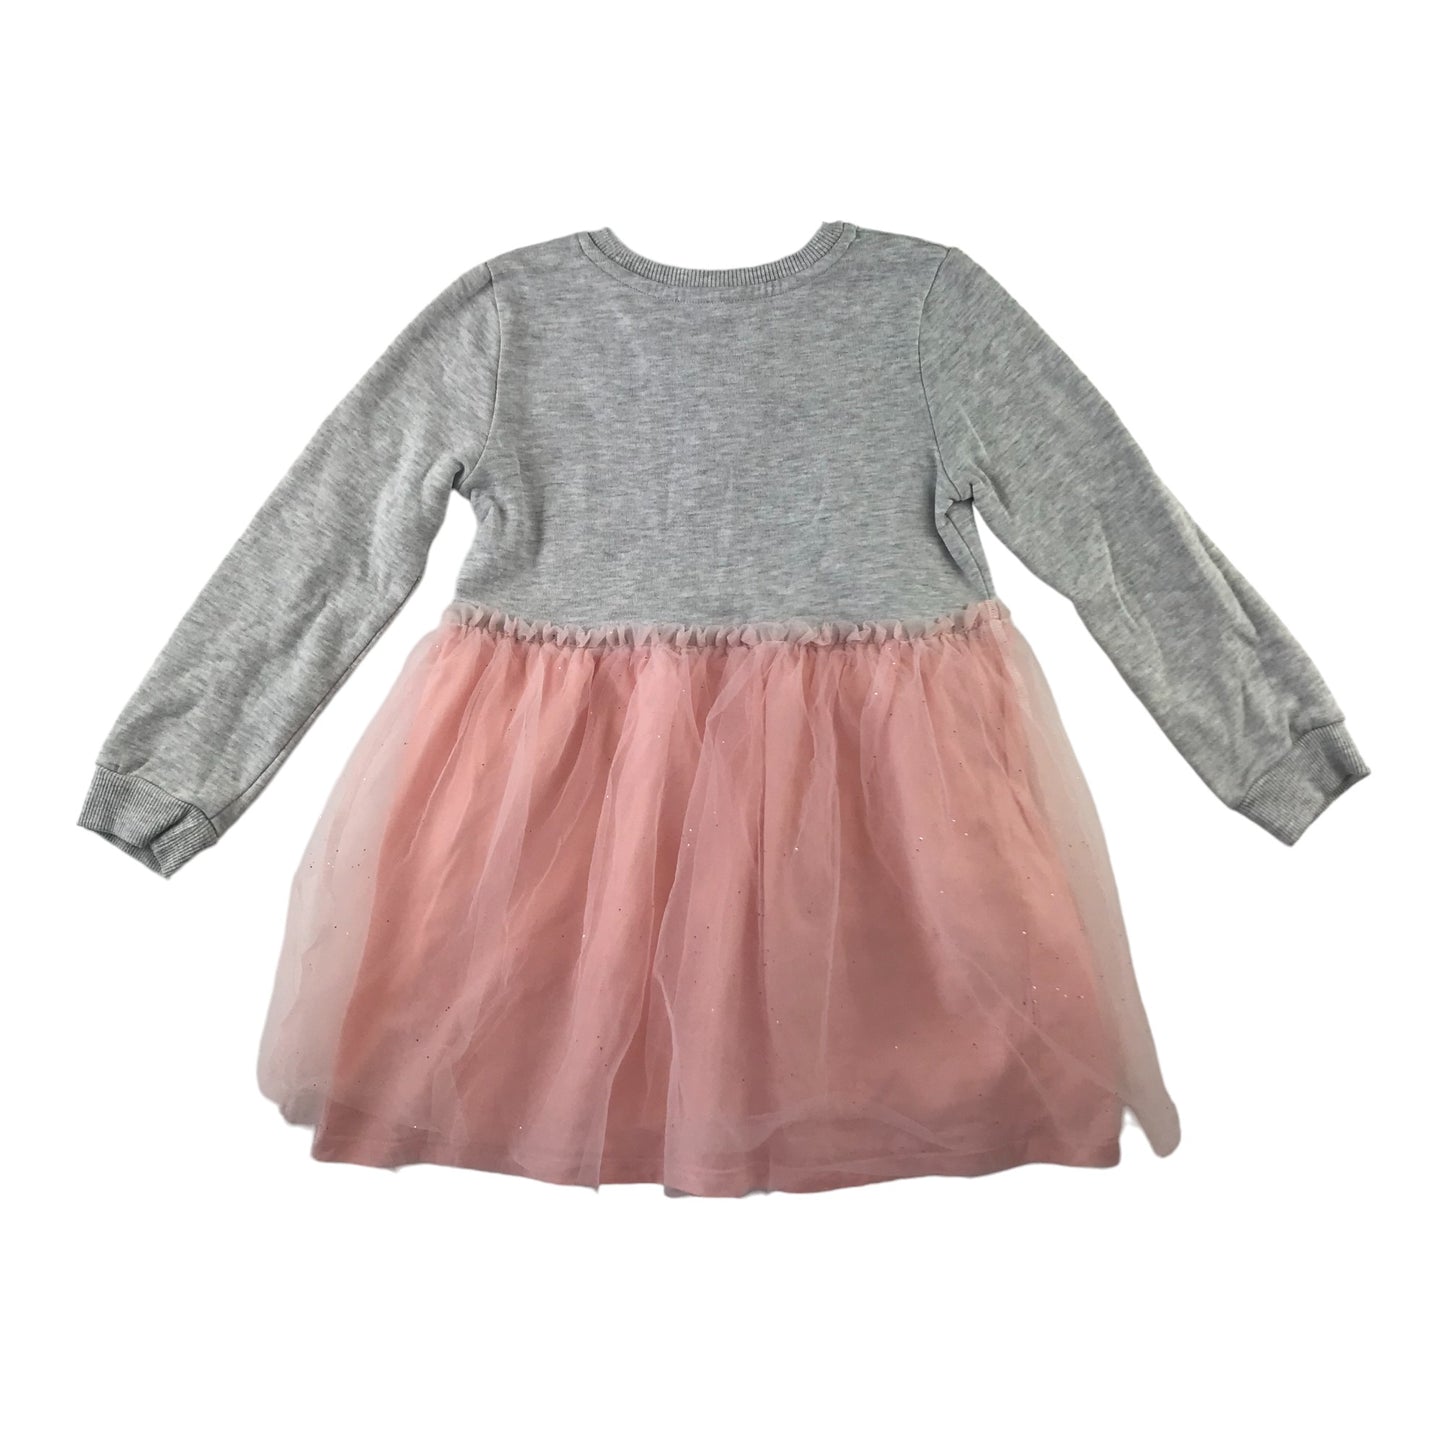 George dress 5-6 years grey and pink jersey top tulle skirt sequin bear